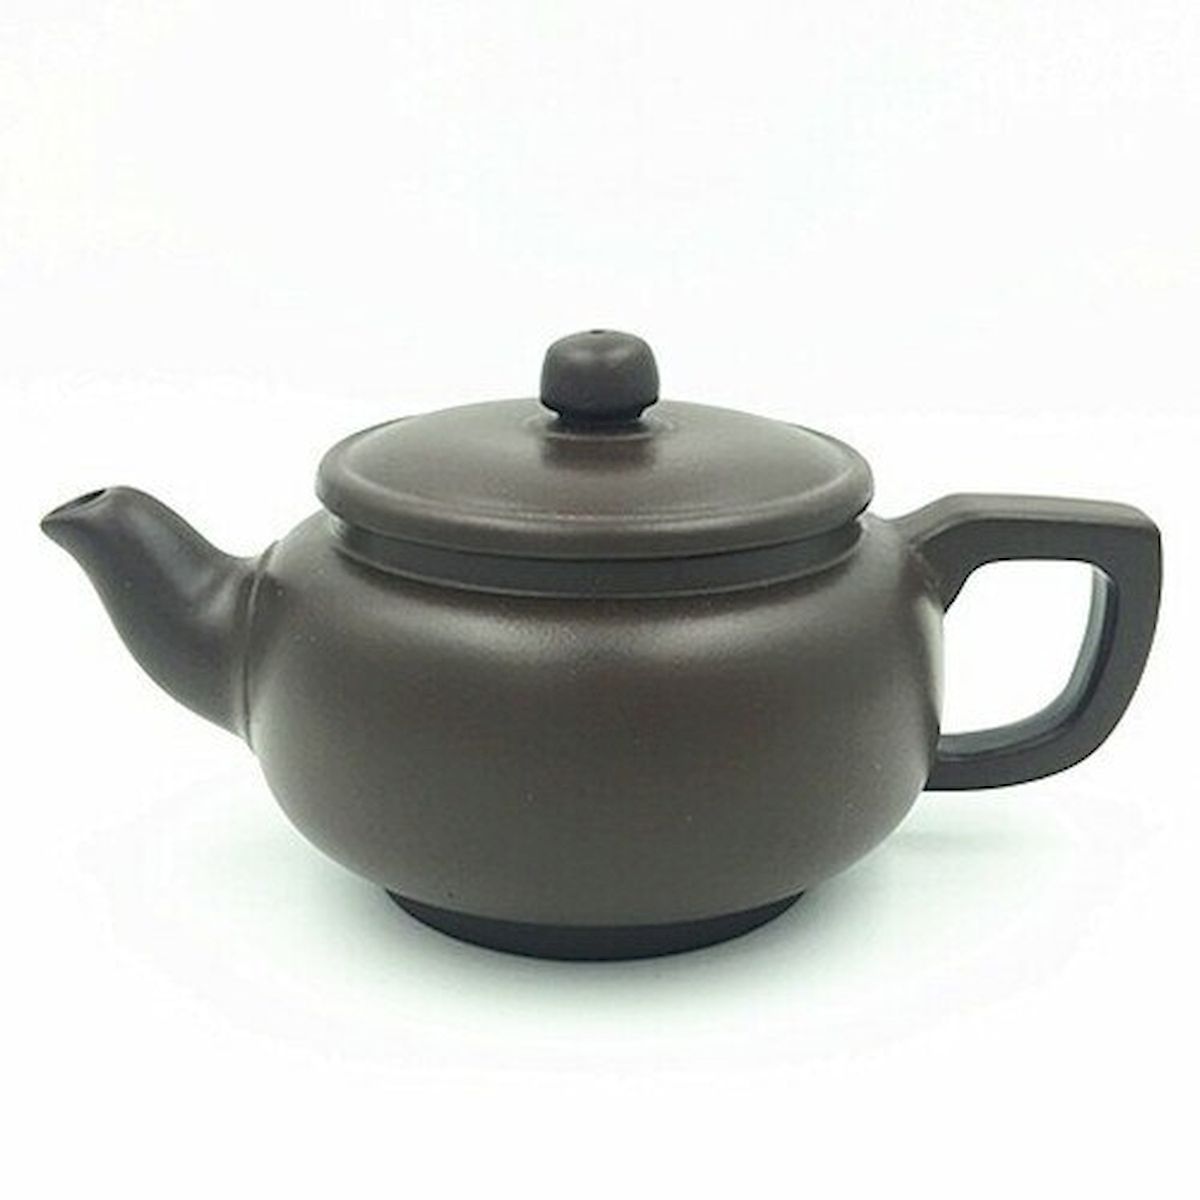 Picture of Mr. MJs HO-YX-1001 Yixing Clay Teapot